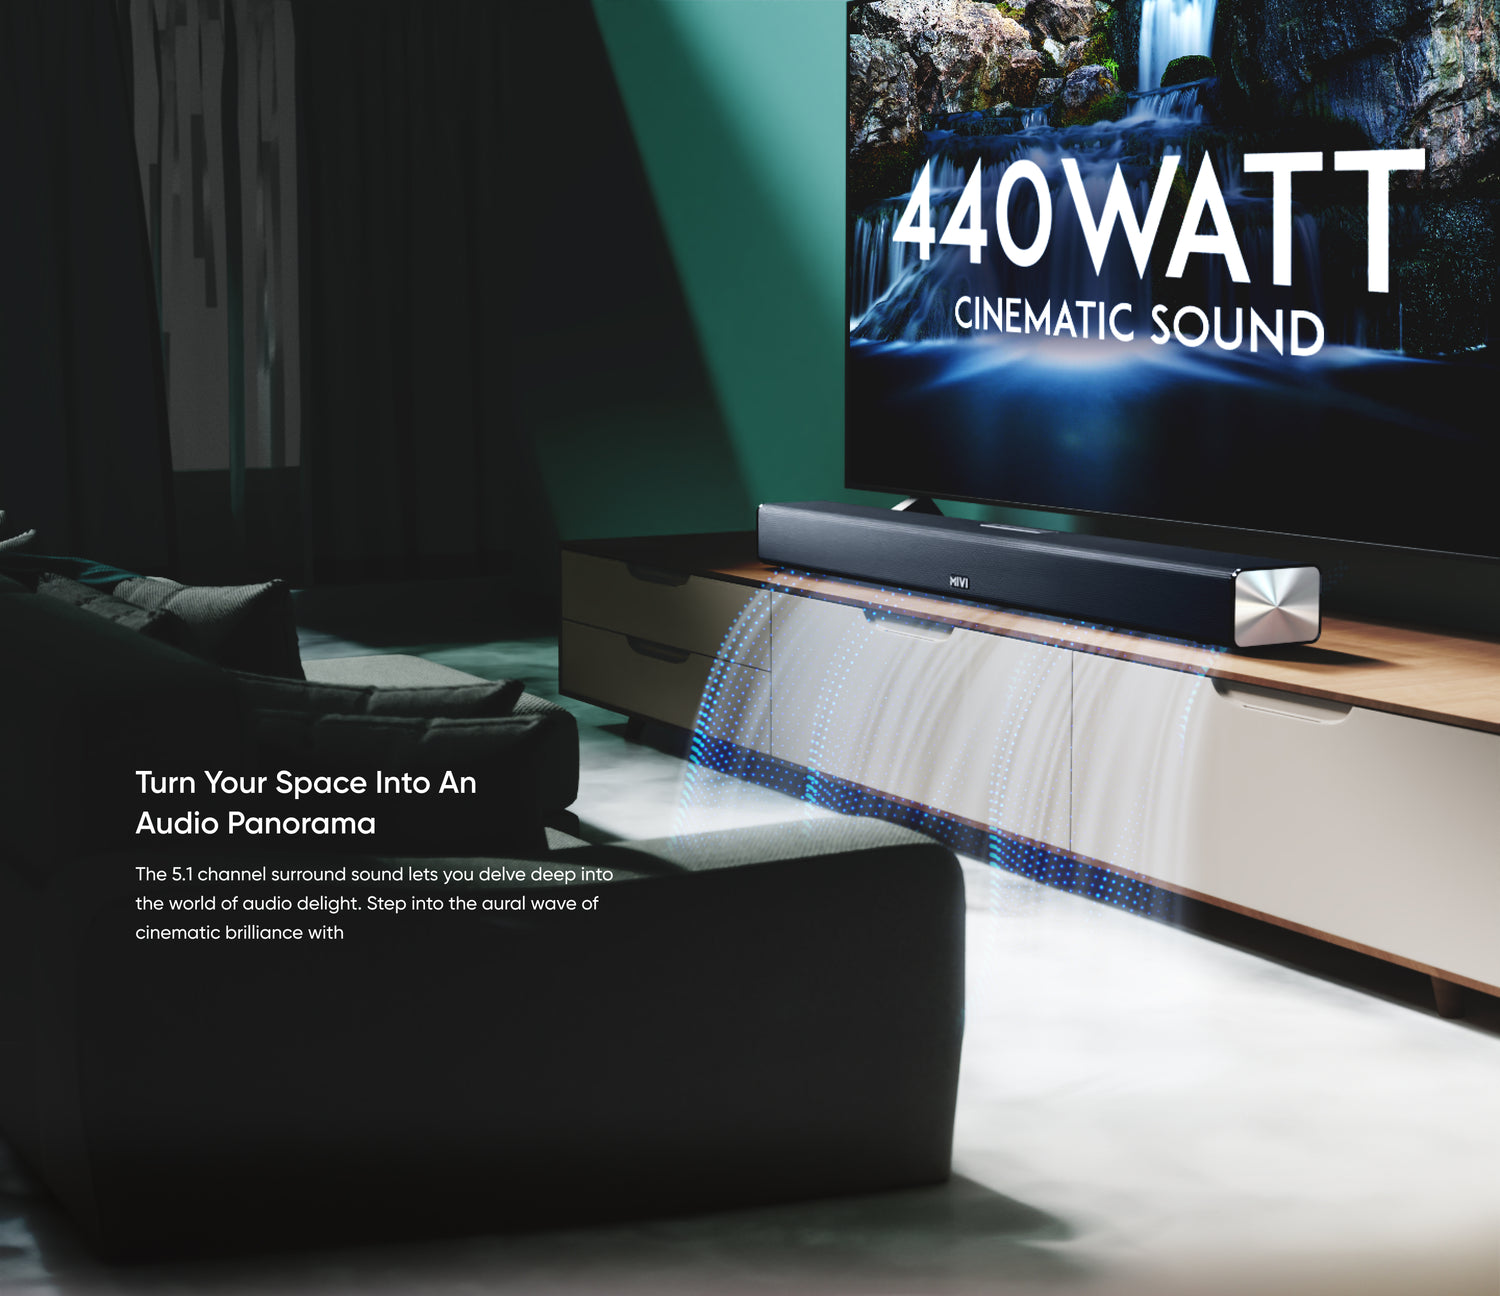 Turn Your Space Into an Audio Panorama - The 5.1 channel surround sound lets you delve deep into the world of audio delight. Step into the aural wave of cinematic brilliance with